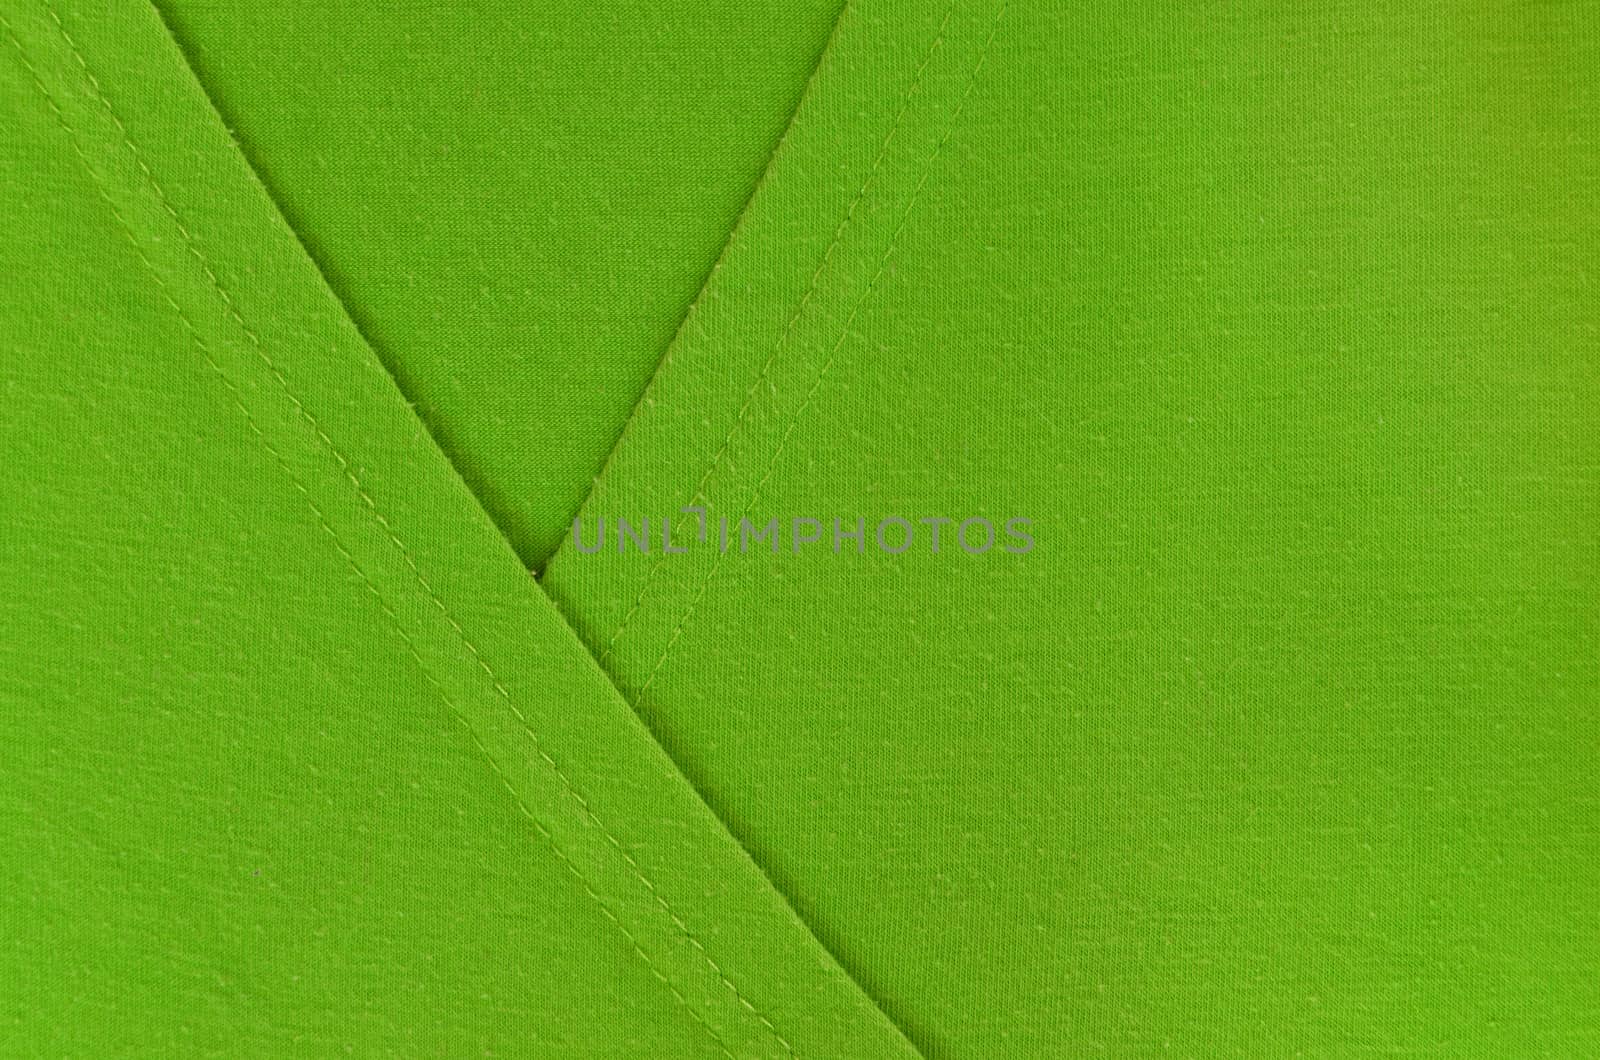 green textile pattern with v folding shape